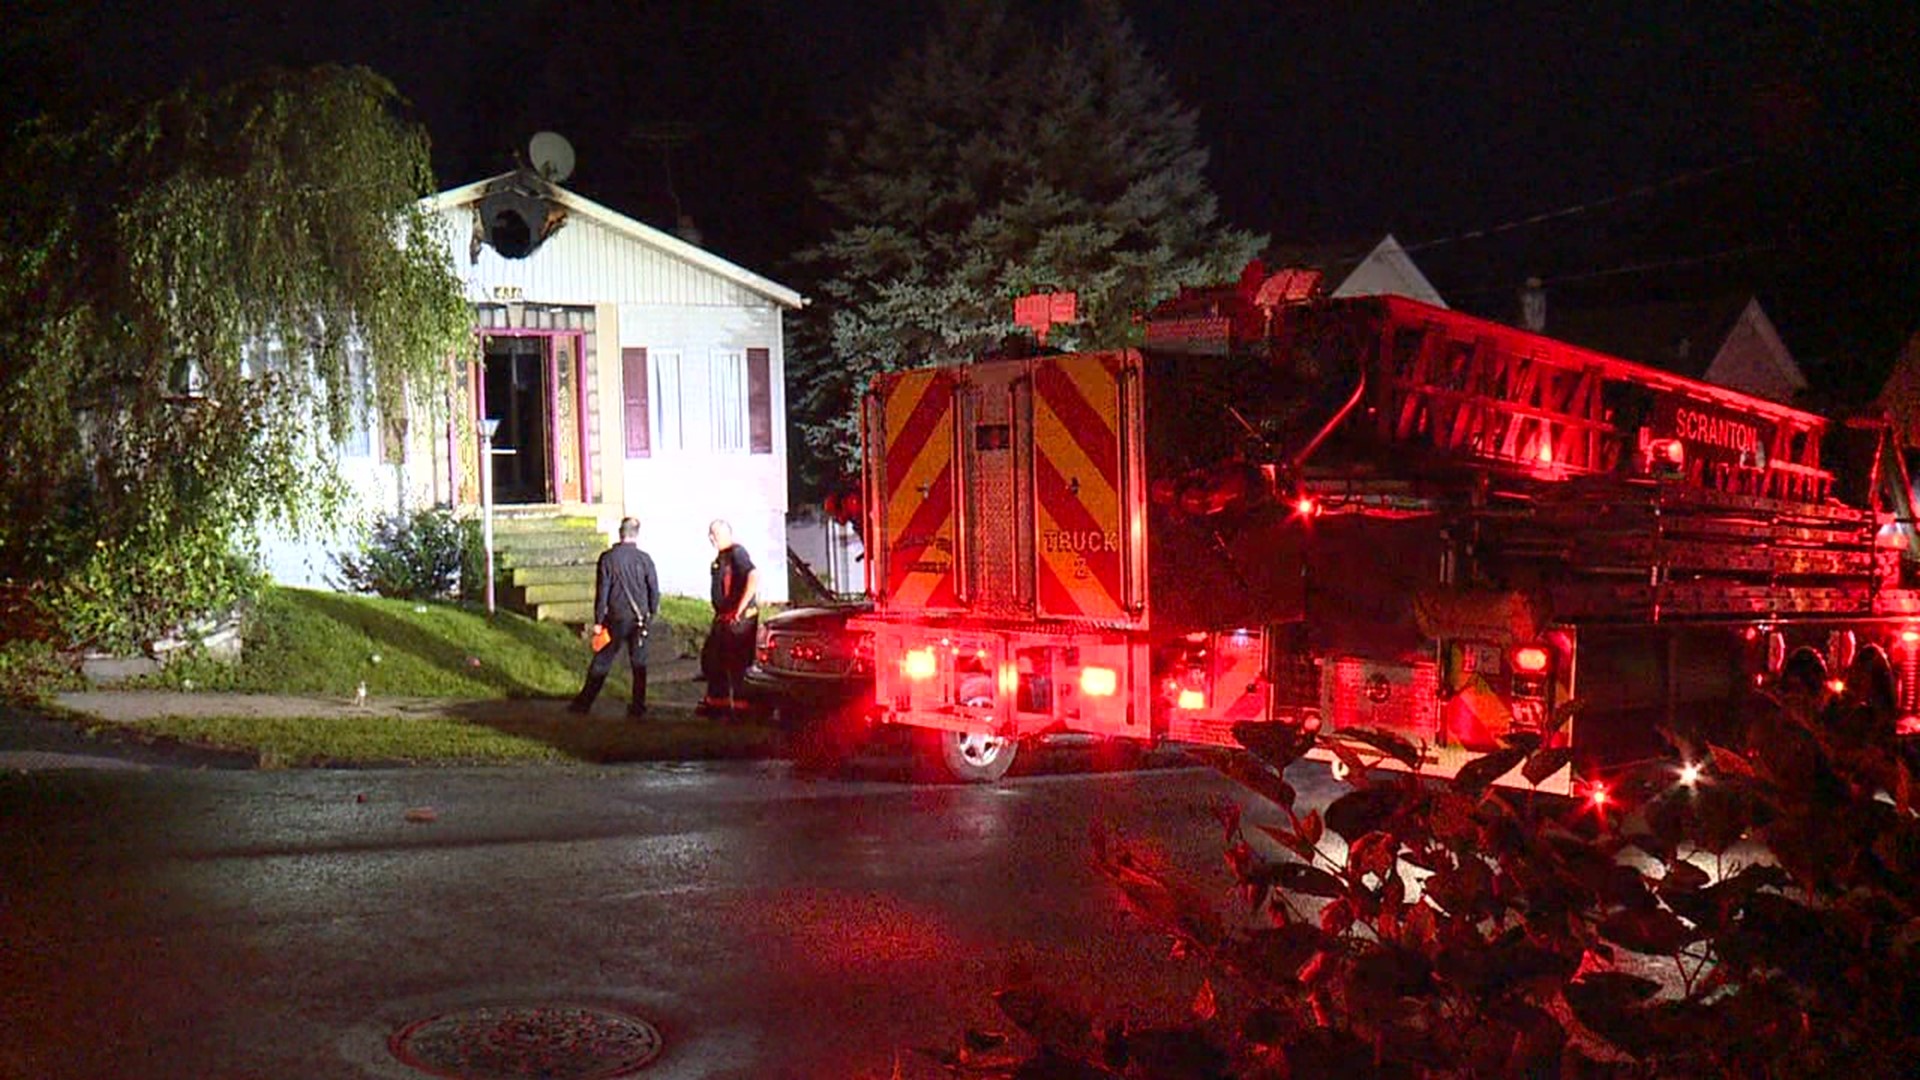 Flames broke out at the home along Brook Street around 3:30 a.m. Thursday.